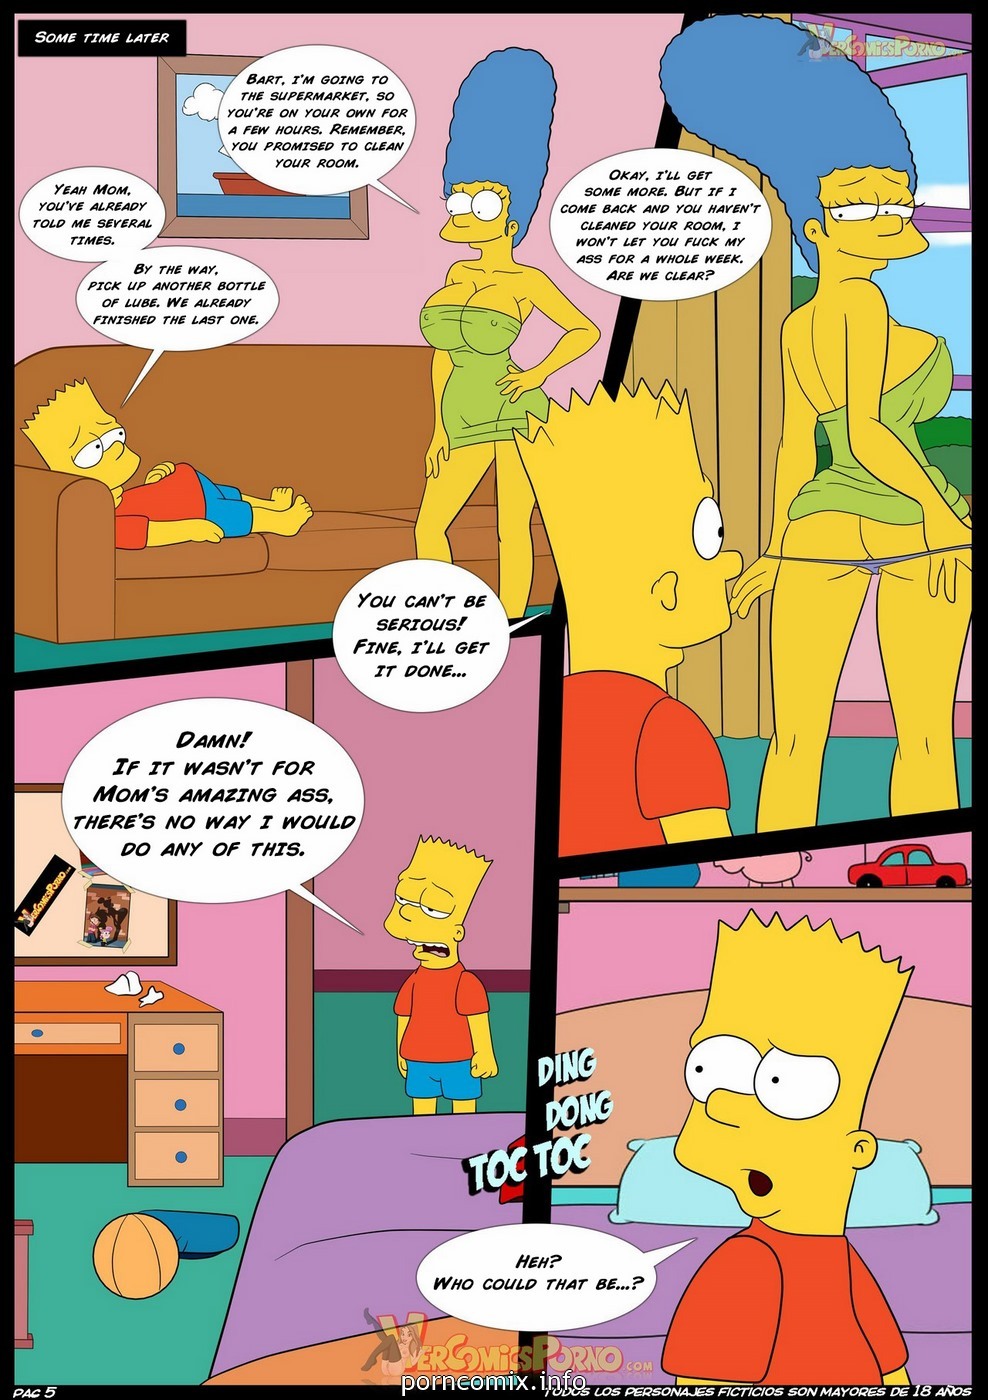 Simpsons Porn 4 Some - Old Habits 4 - The Simpsons - KingComiX.com